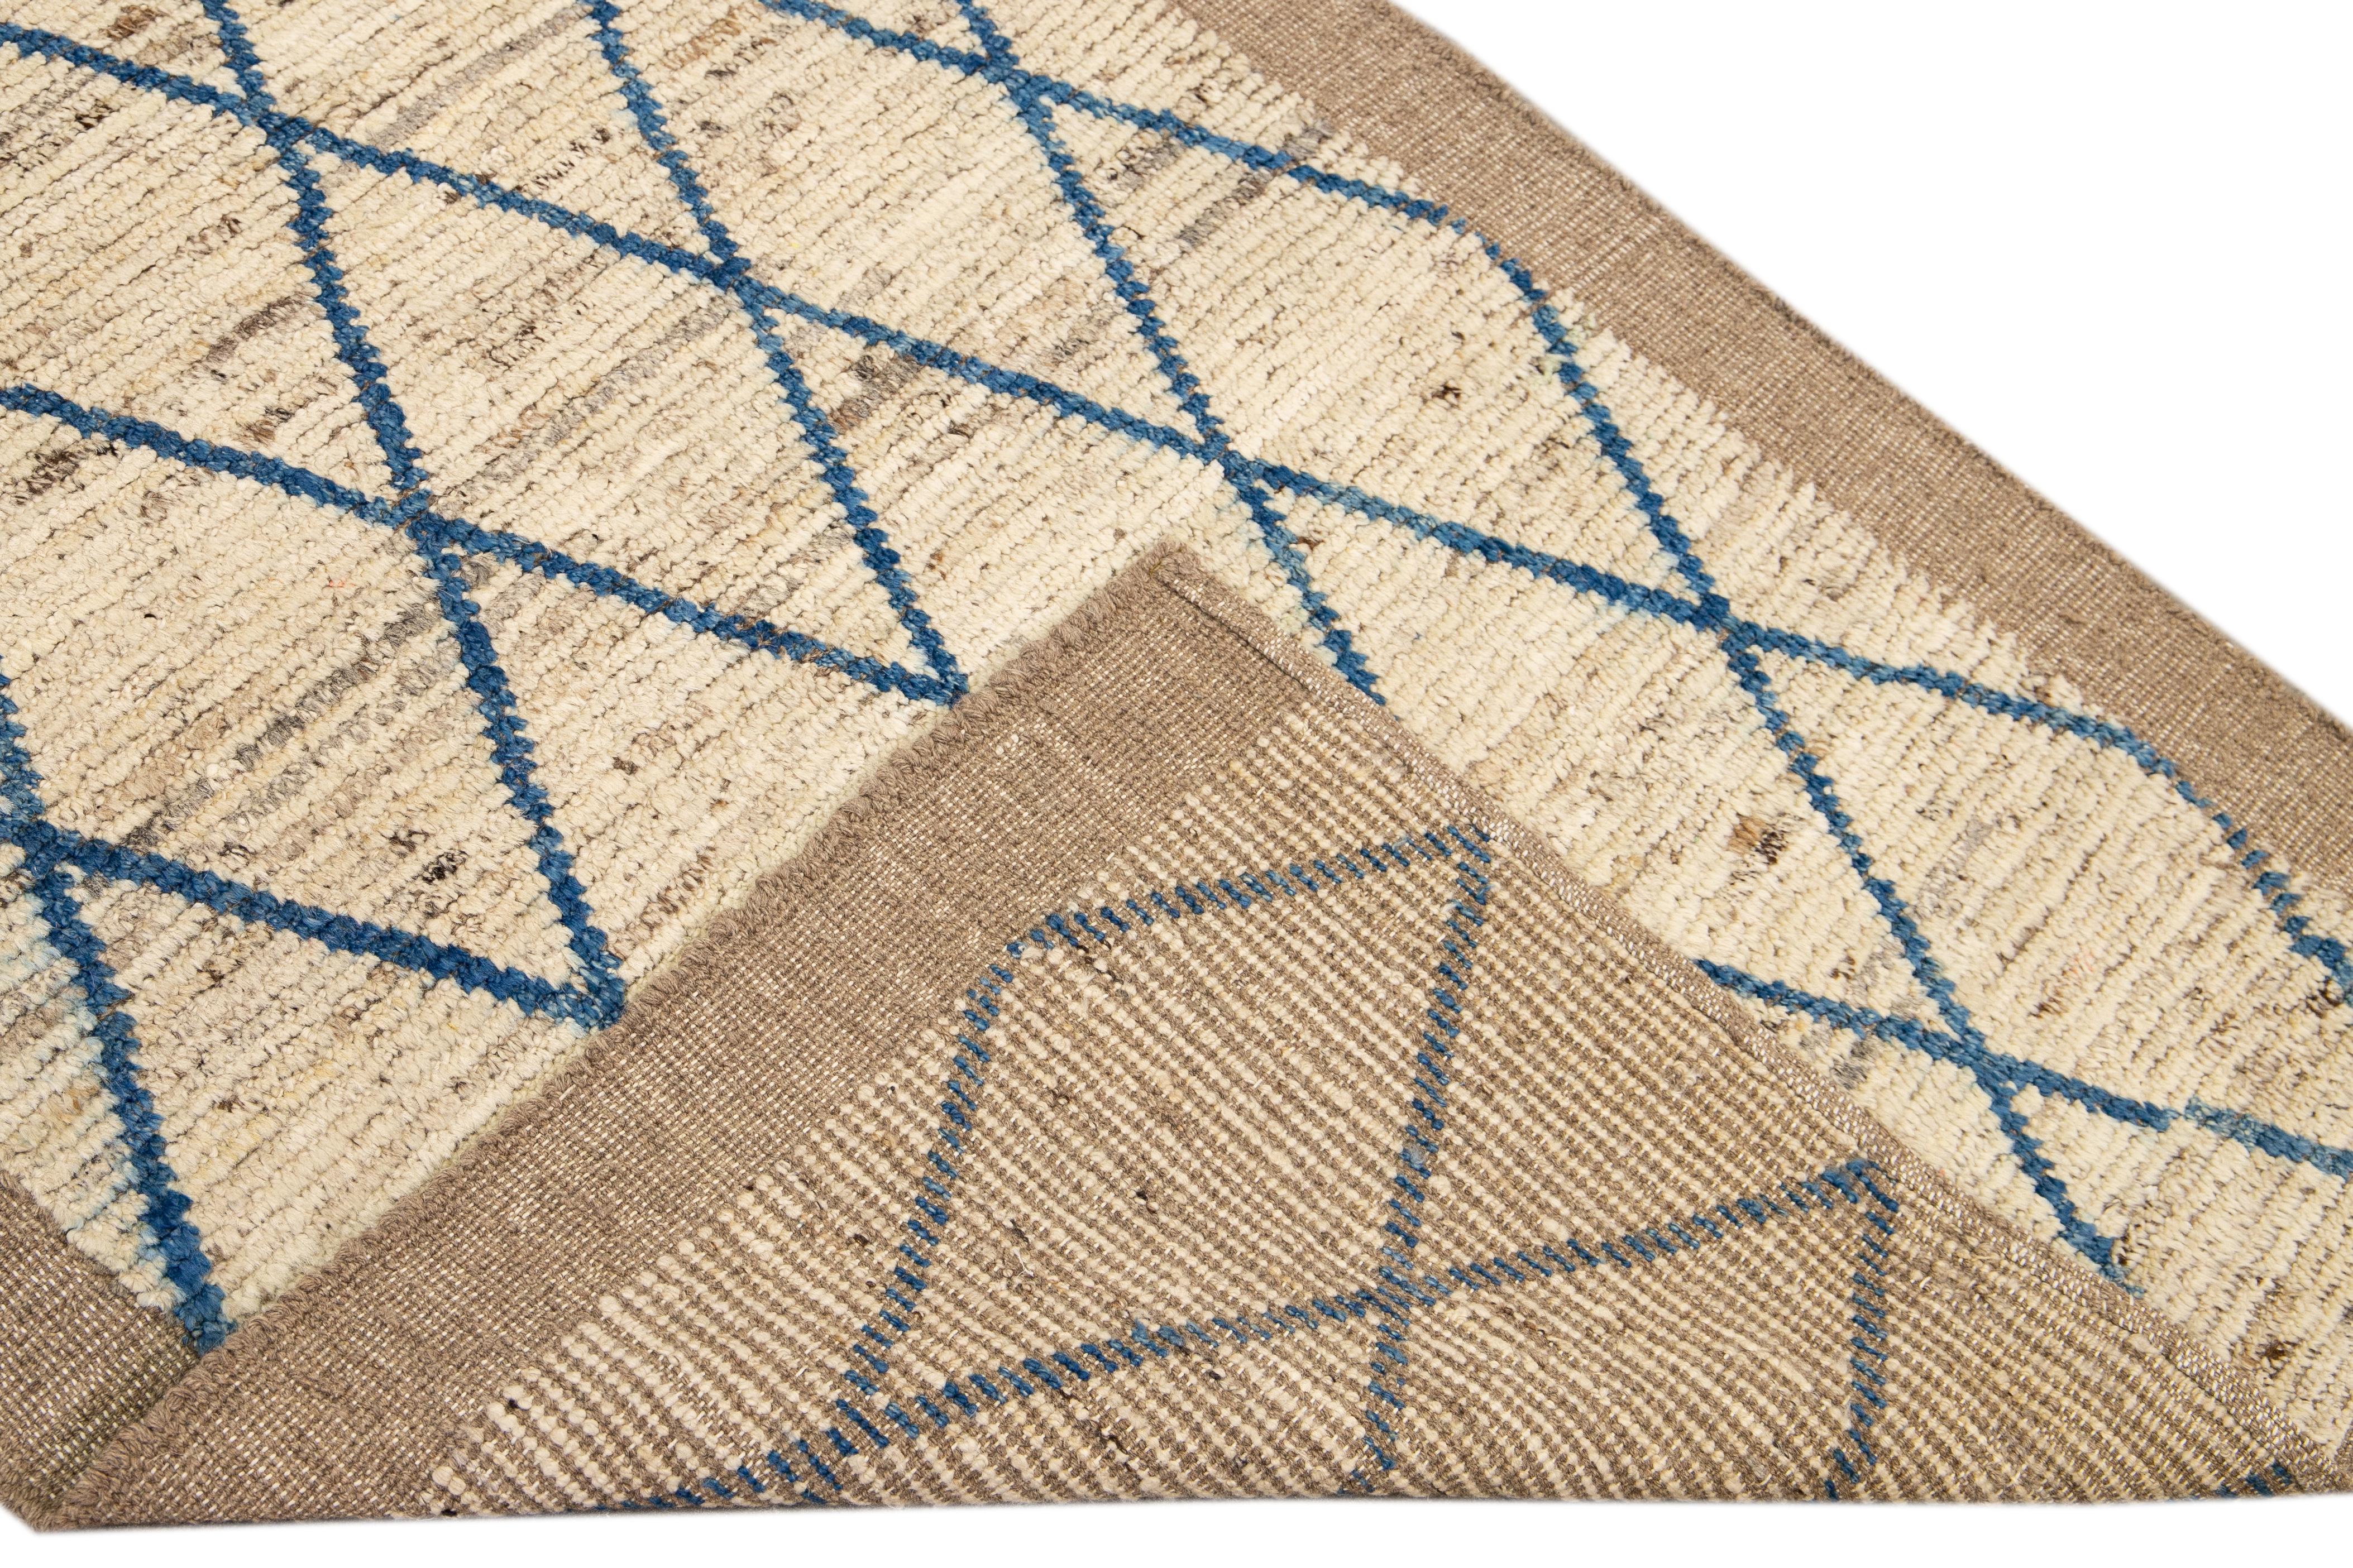 Beautiful Moroccan style handmade wool rug with a beige field. This Modern rug has blue accents featuring a gorgeous all-over bohemian tribal design.

This rug measures: 3'6